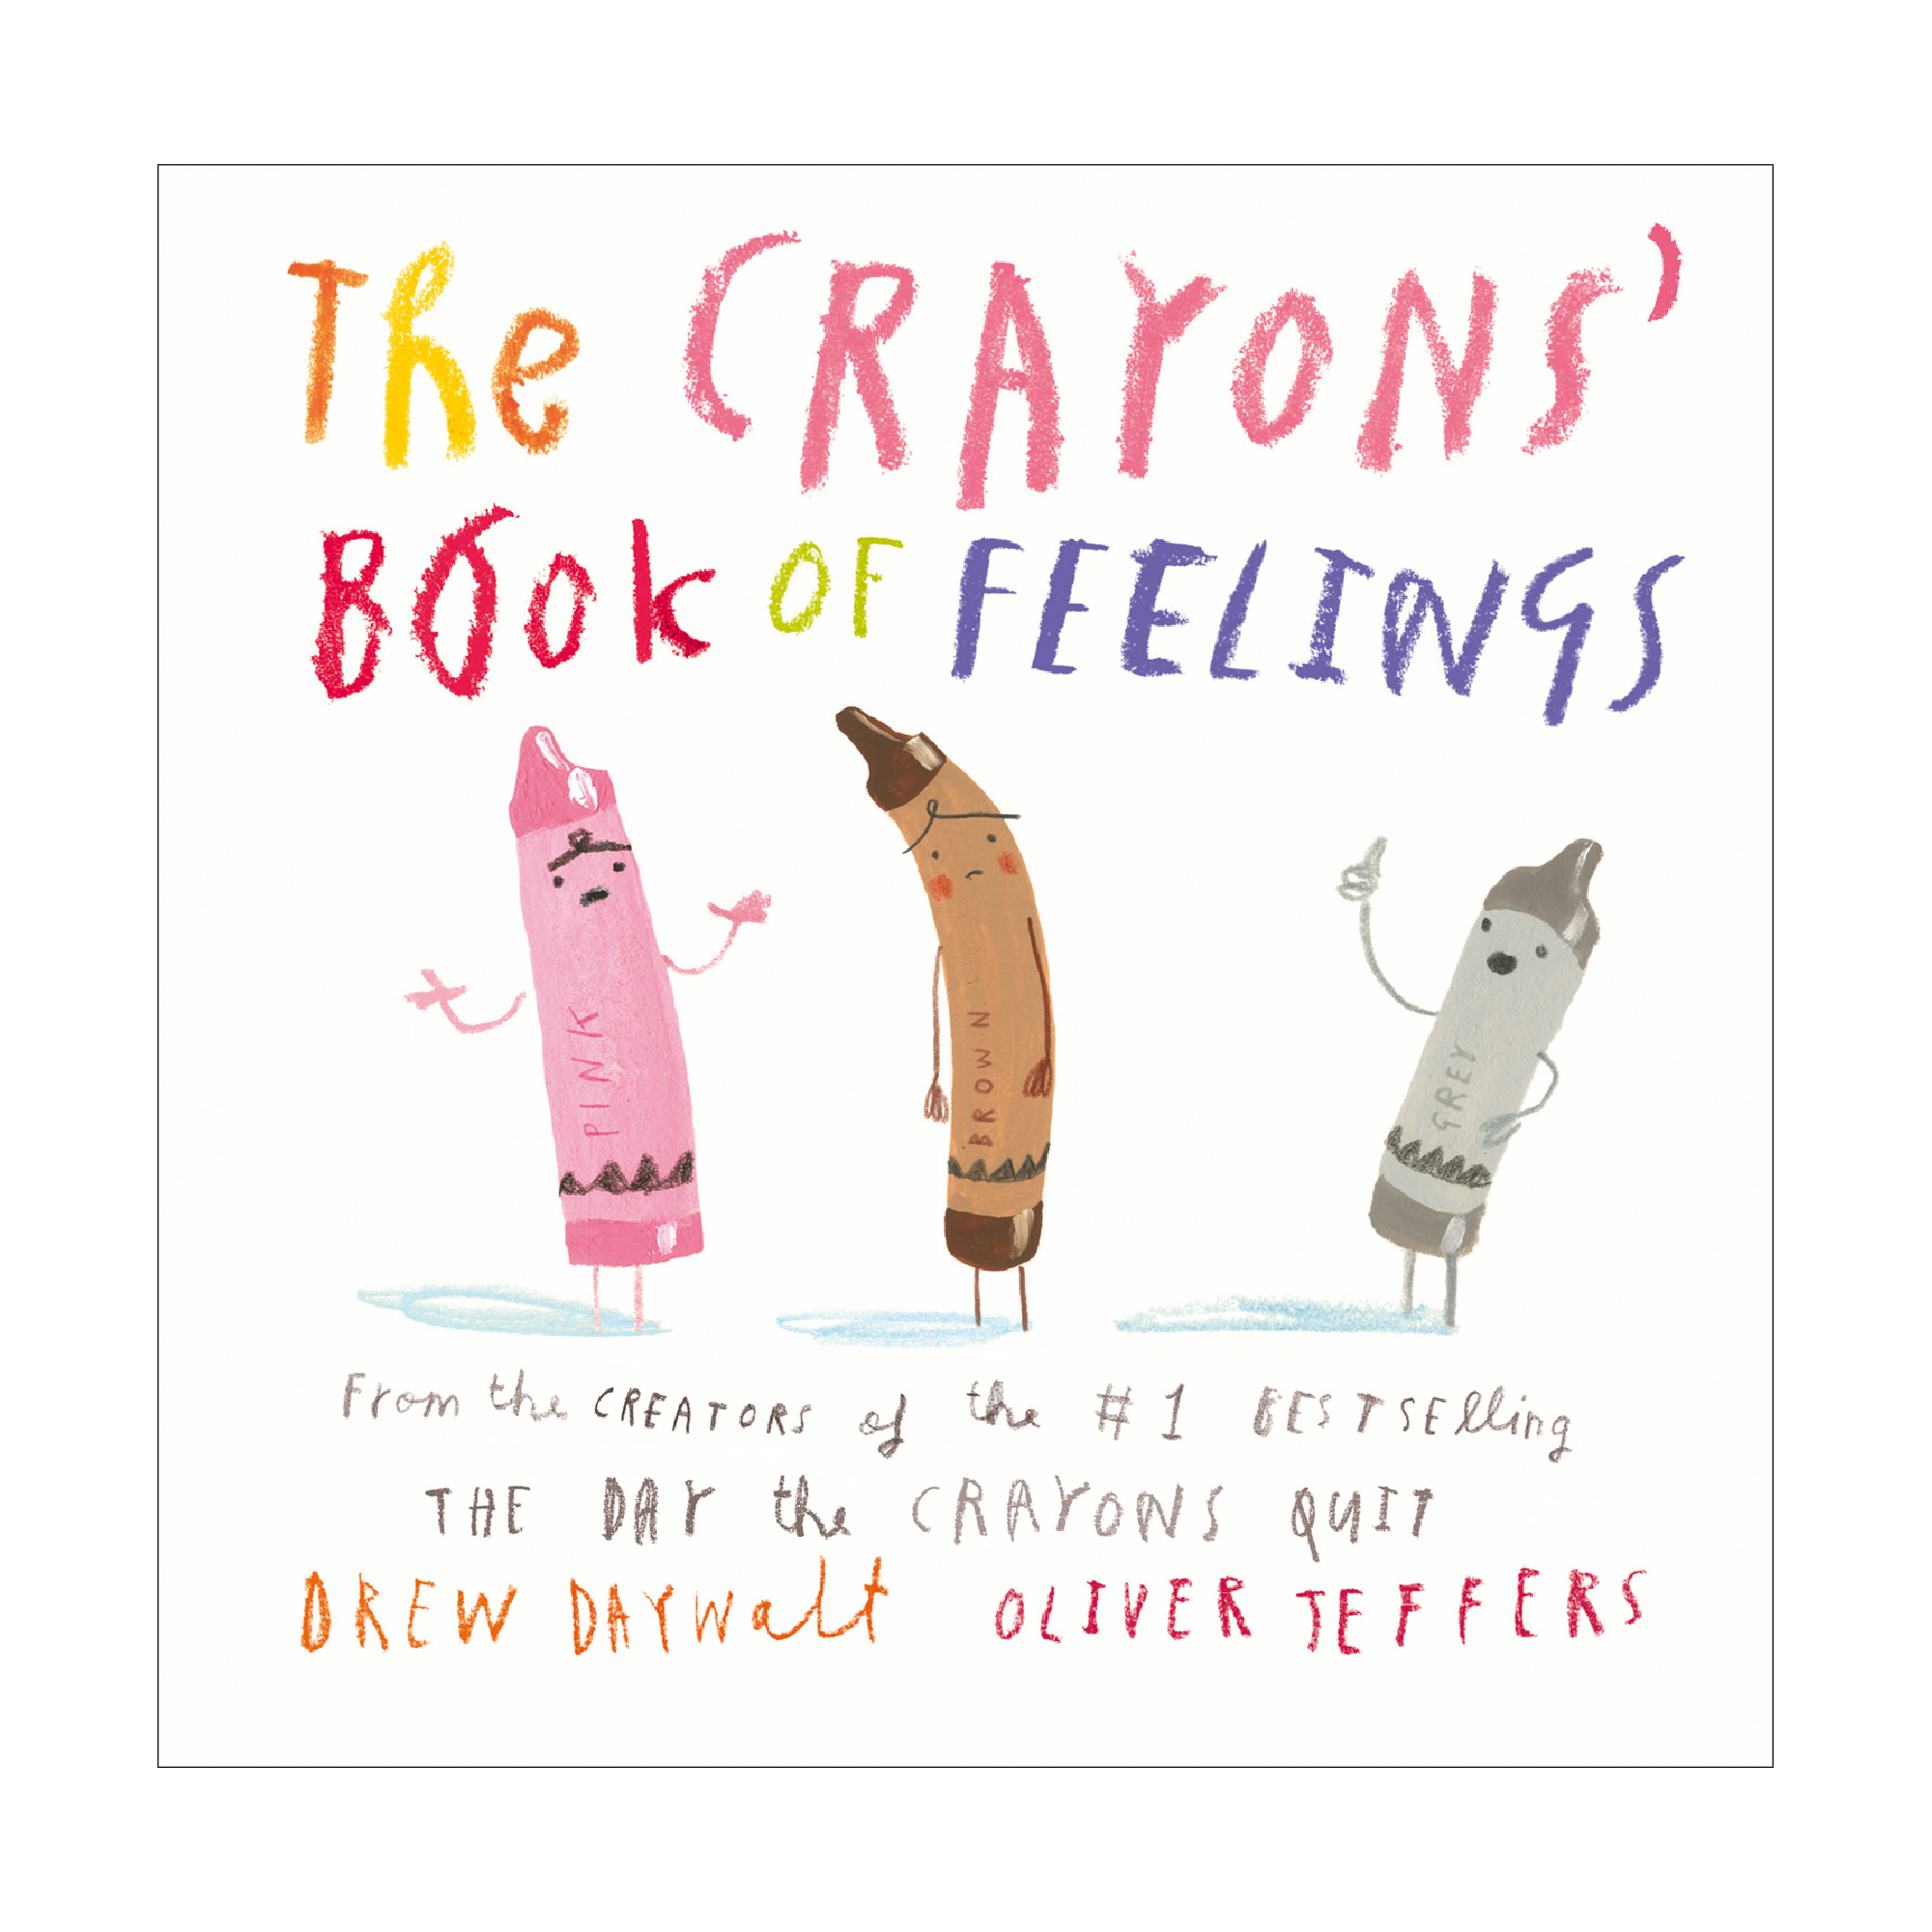 The Crayons Book of Feelings